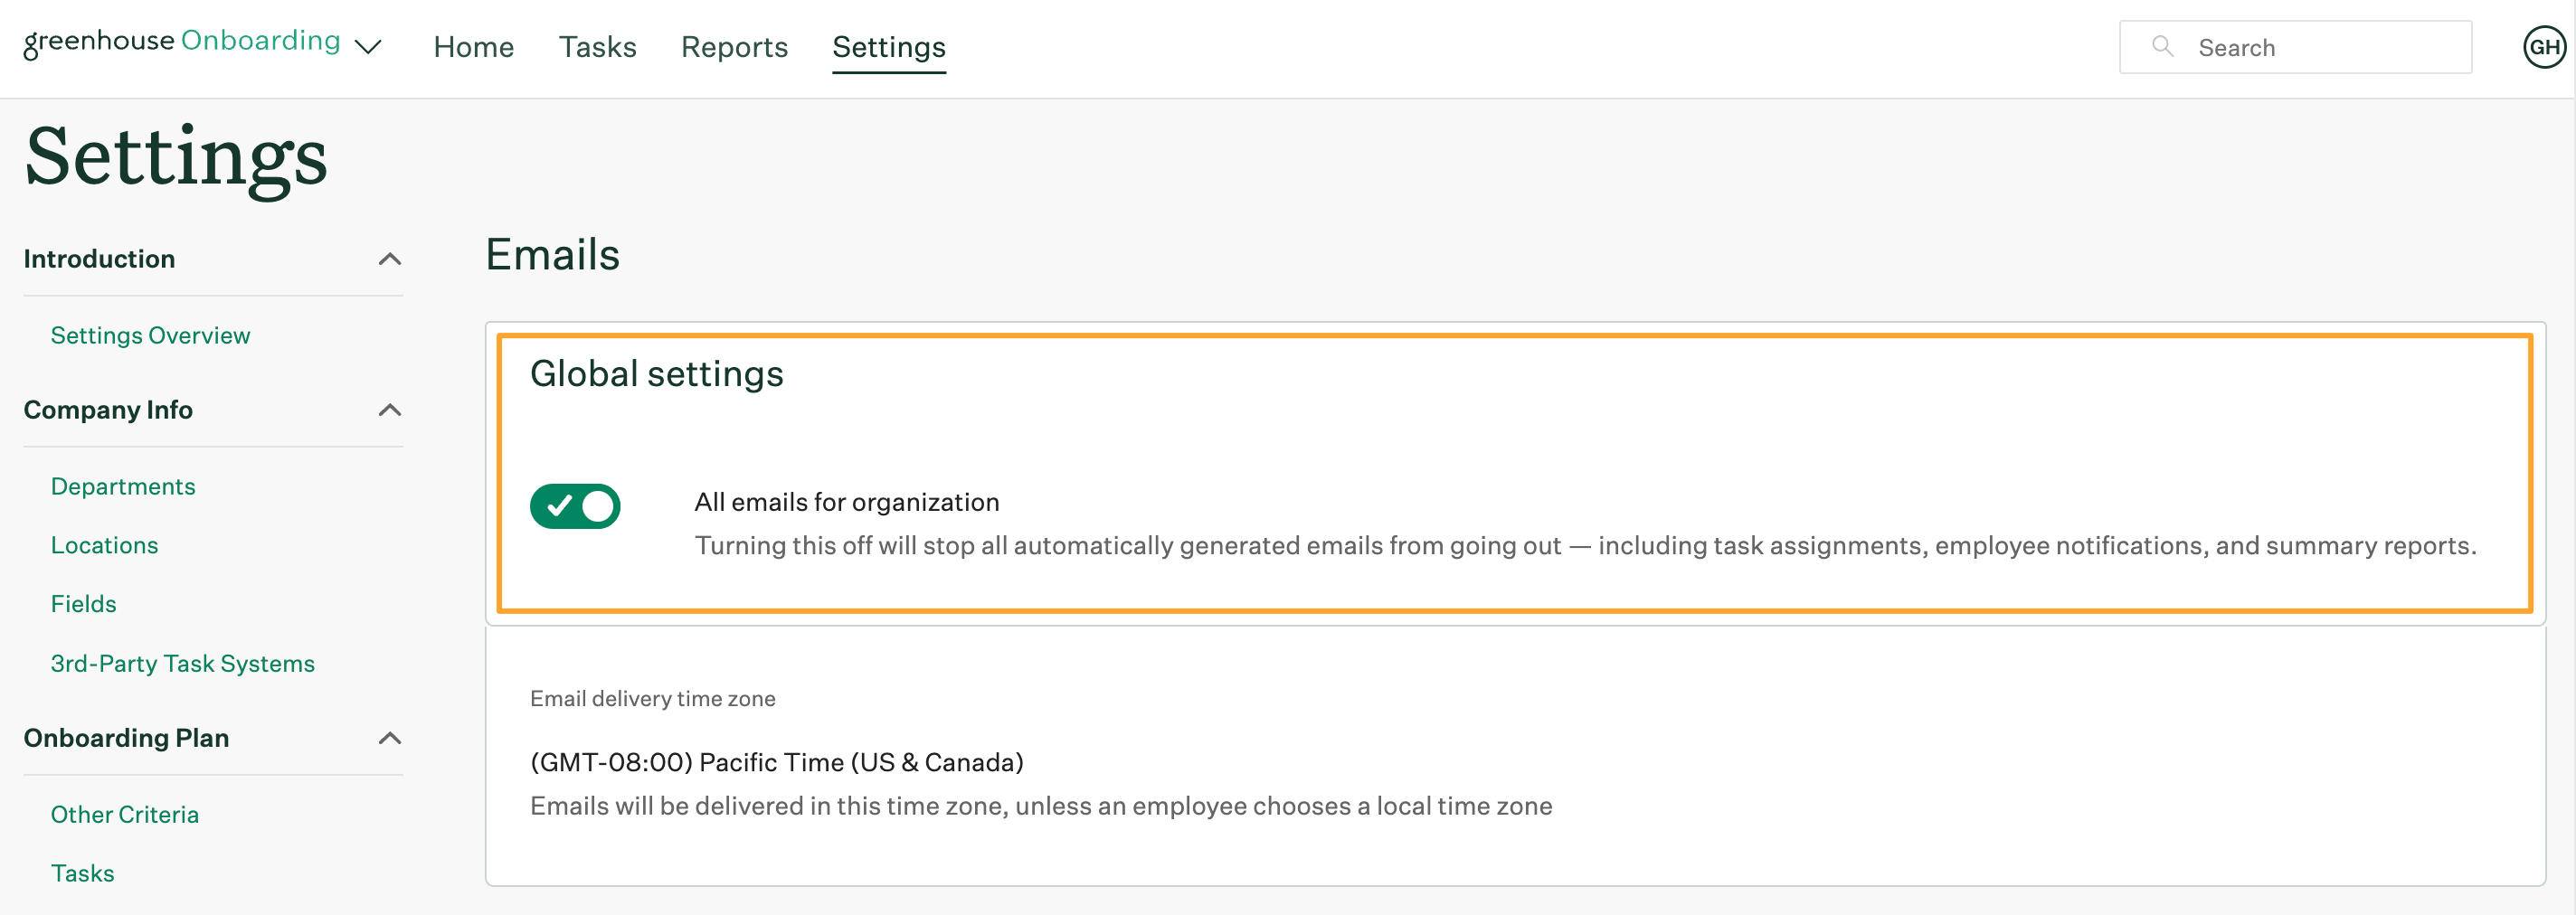 Screenshot of emails settings page with global settings section highlighted